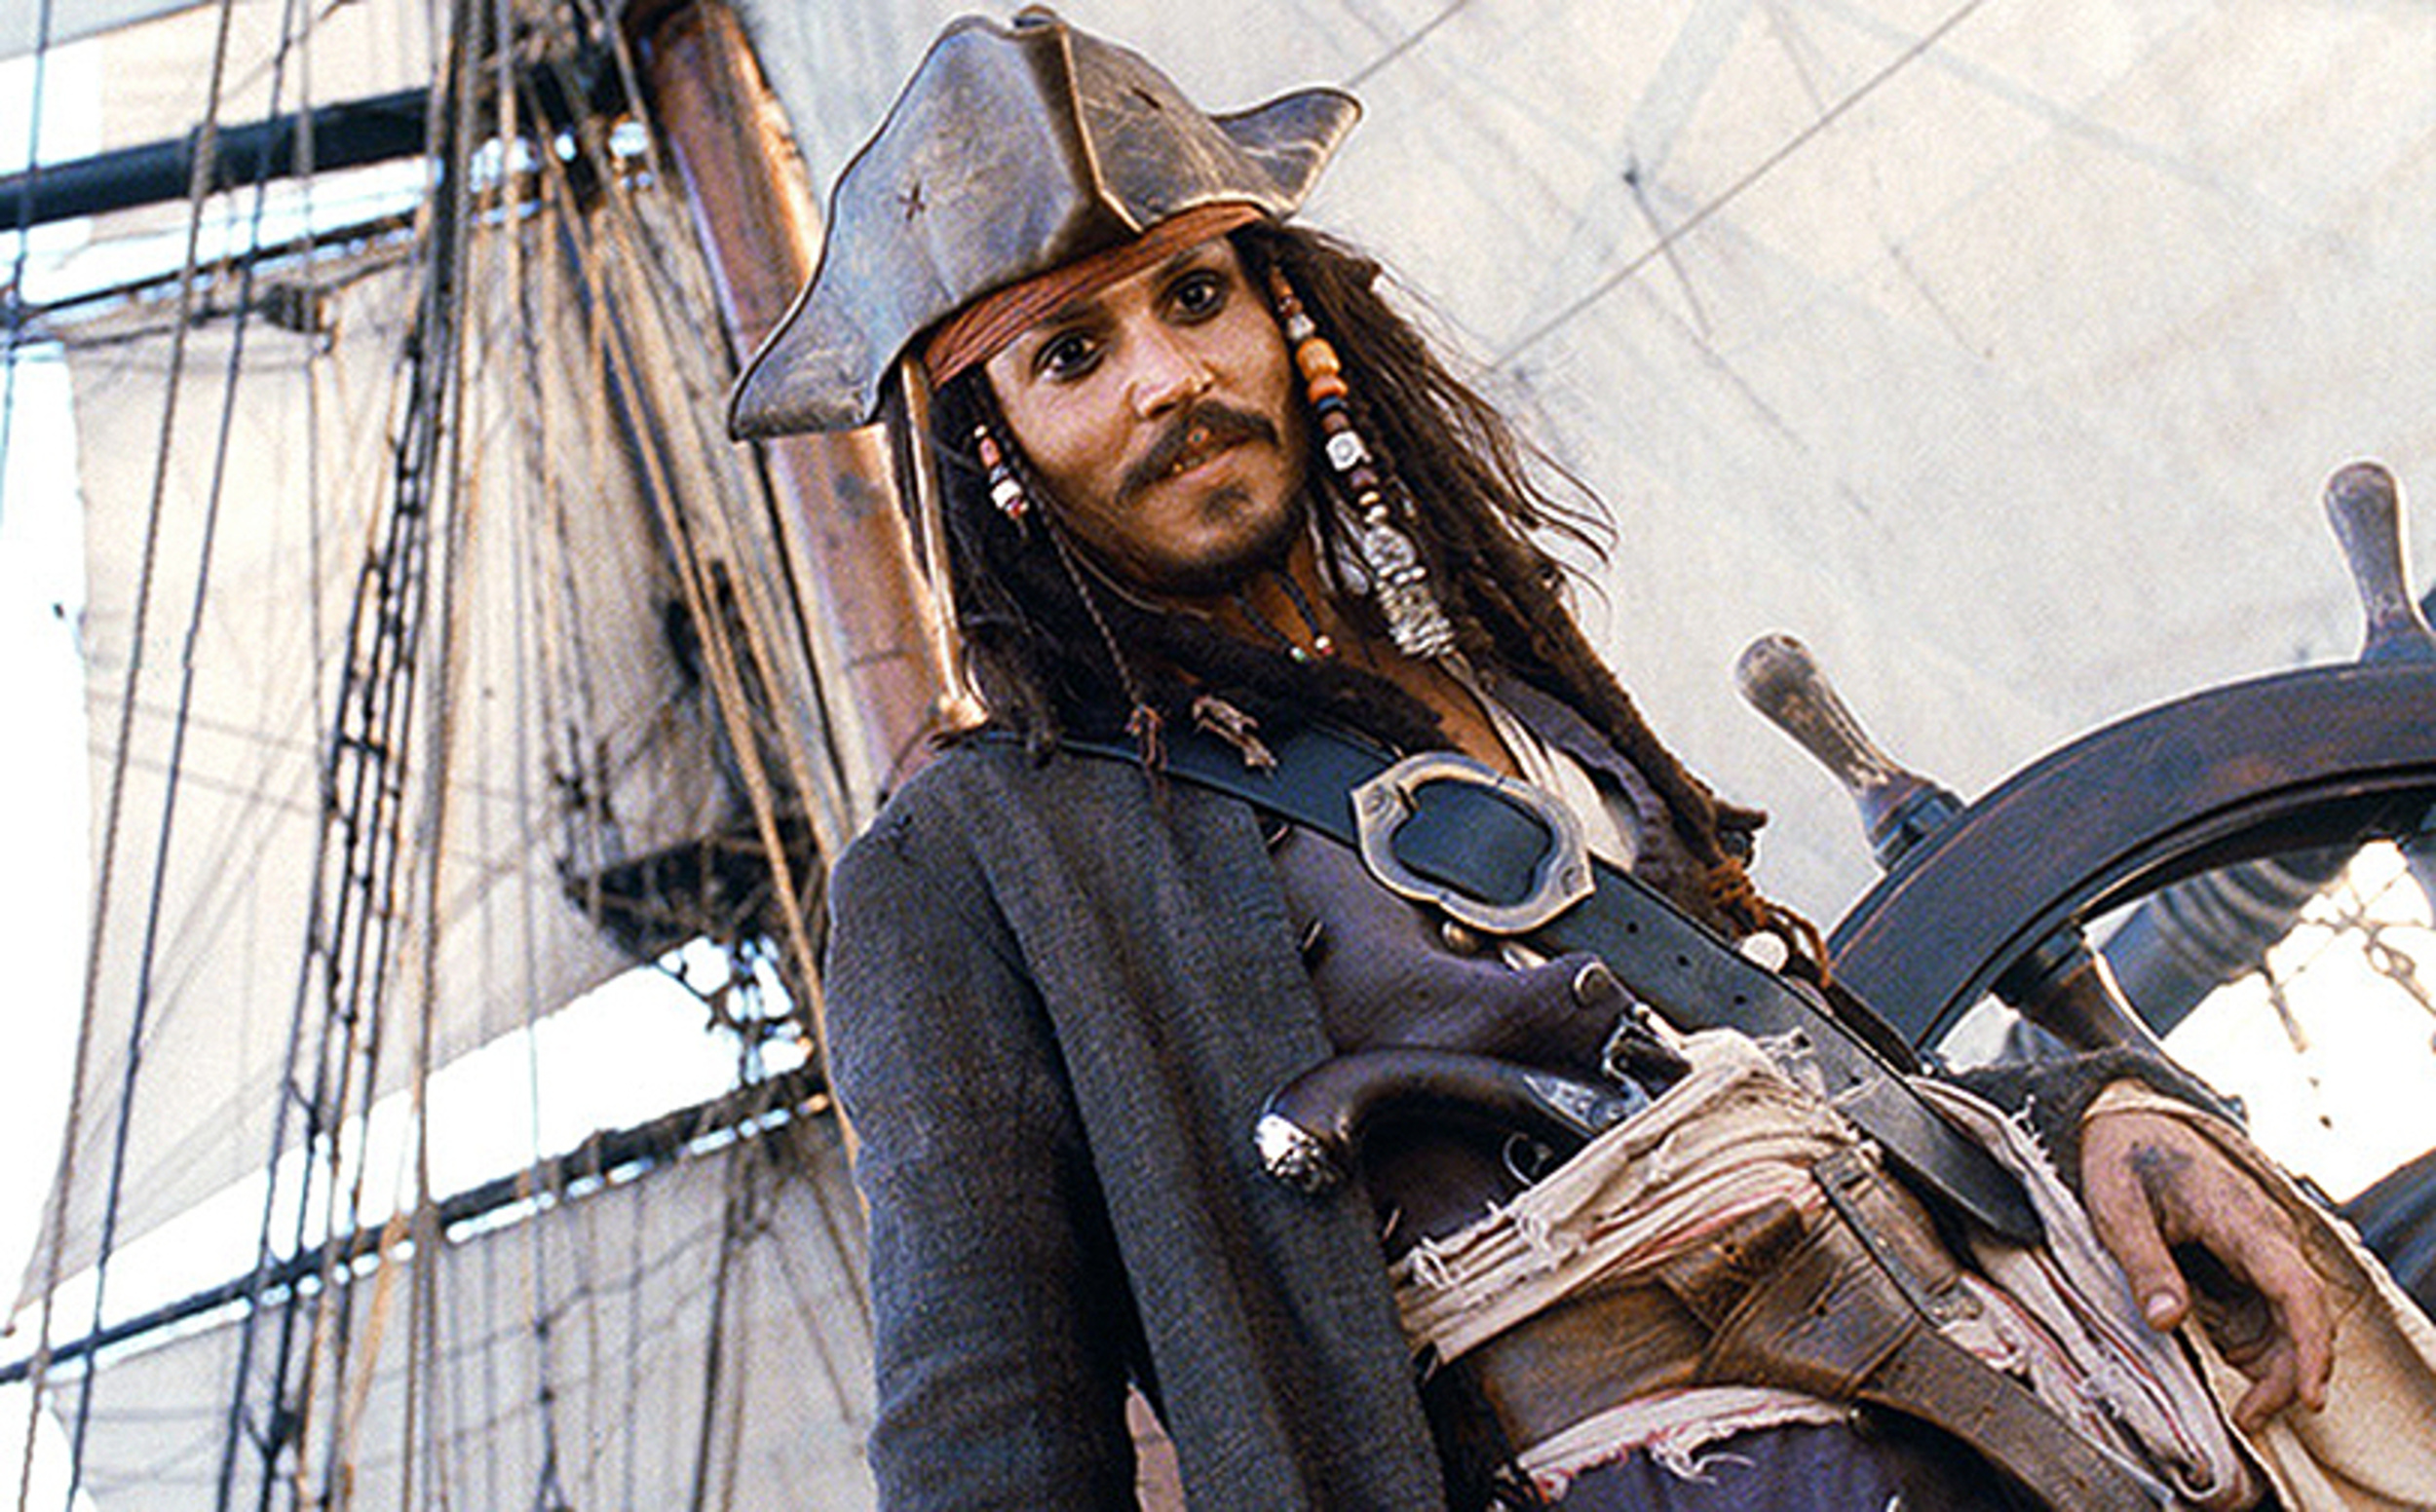 <p>In the script, Jack Sparrow as a more straightforward character. Depp, though, didn’t really want to keep things normal. His idea was that pirates were the “rock stars” of the era, so he modeled his character after Keith Richards of The Rolling Stones. He also went ahead and capped his teeth with gold. Disney executive Michael Eisner saw what Depp was doing and proclaimed, “He’s ruining the film!” But eventually, Depp earned the trust of the production, which would work out in the long run.</p><p>You may also like: <a href='https://www.yardbarker.com/entertainment/articles/20_films_that_feel_like_a_vacation_030524/s1__37029440'>20 films that feel like a vacation</a></p>